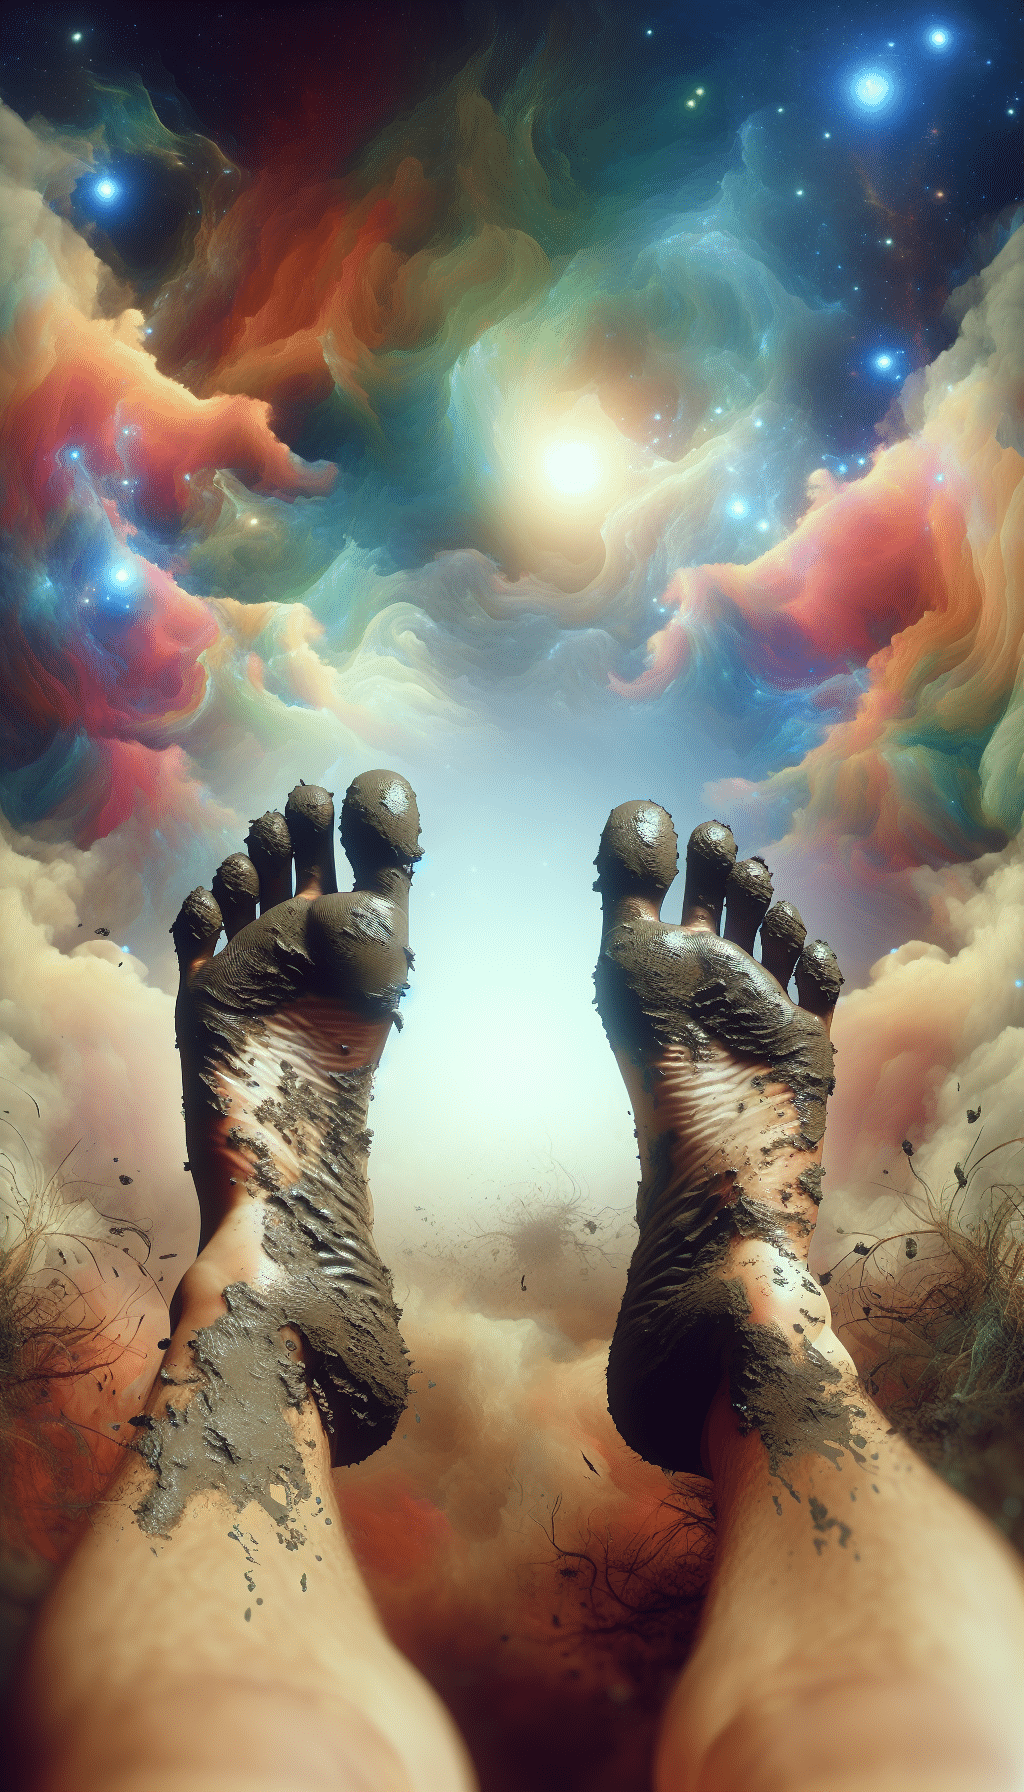 dirty feet dream meaning